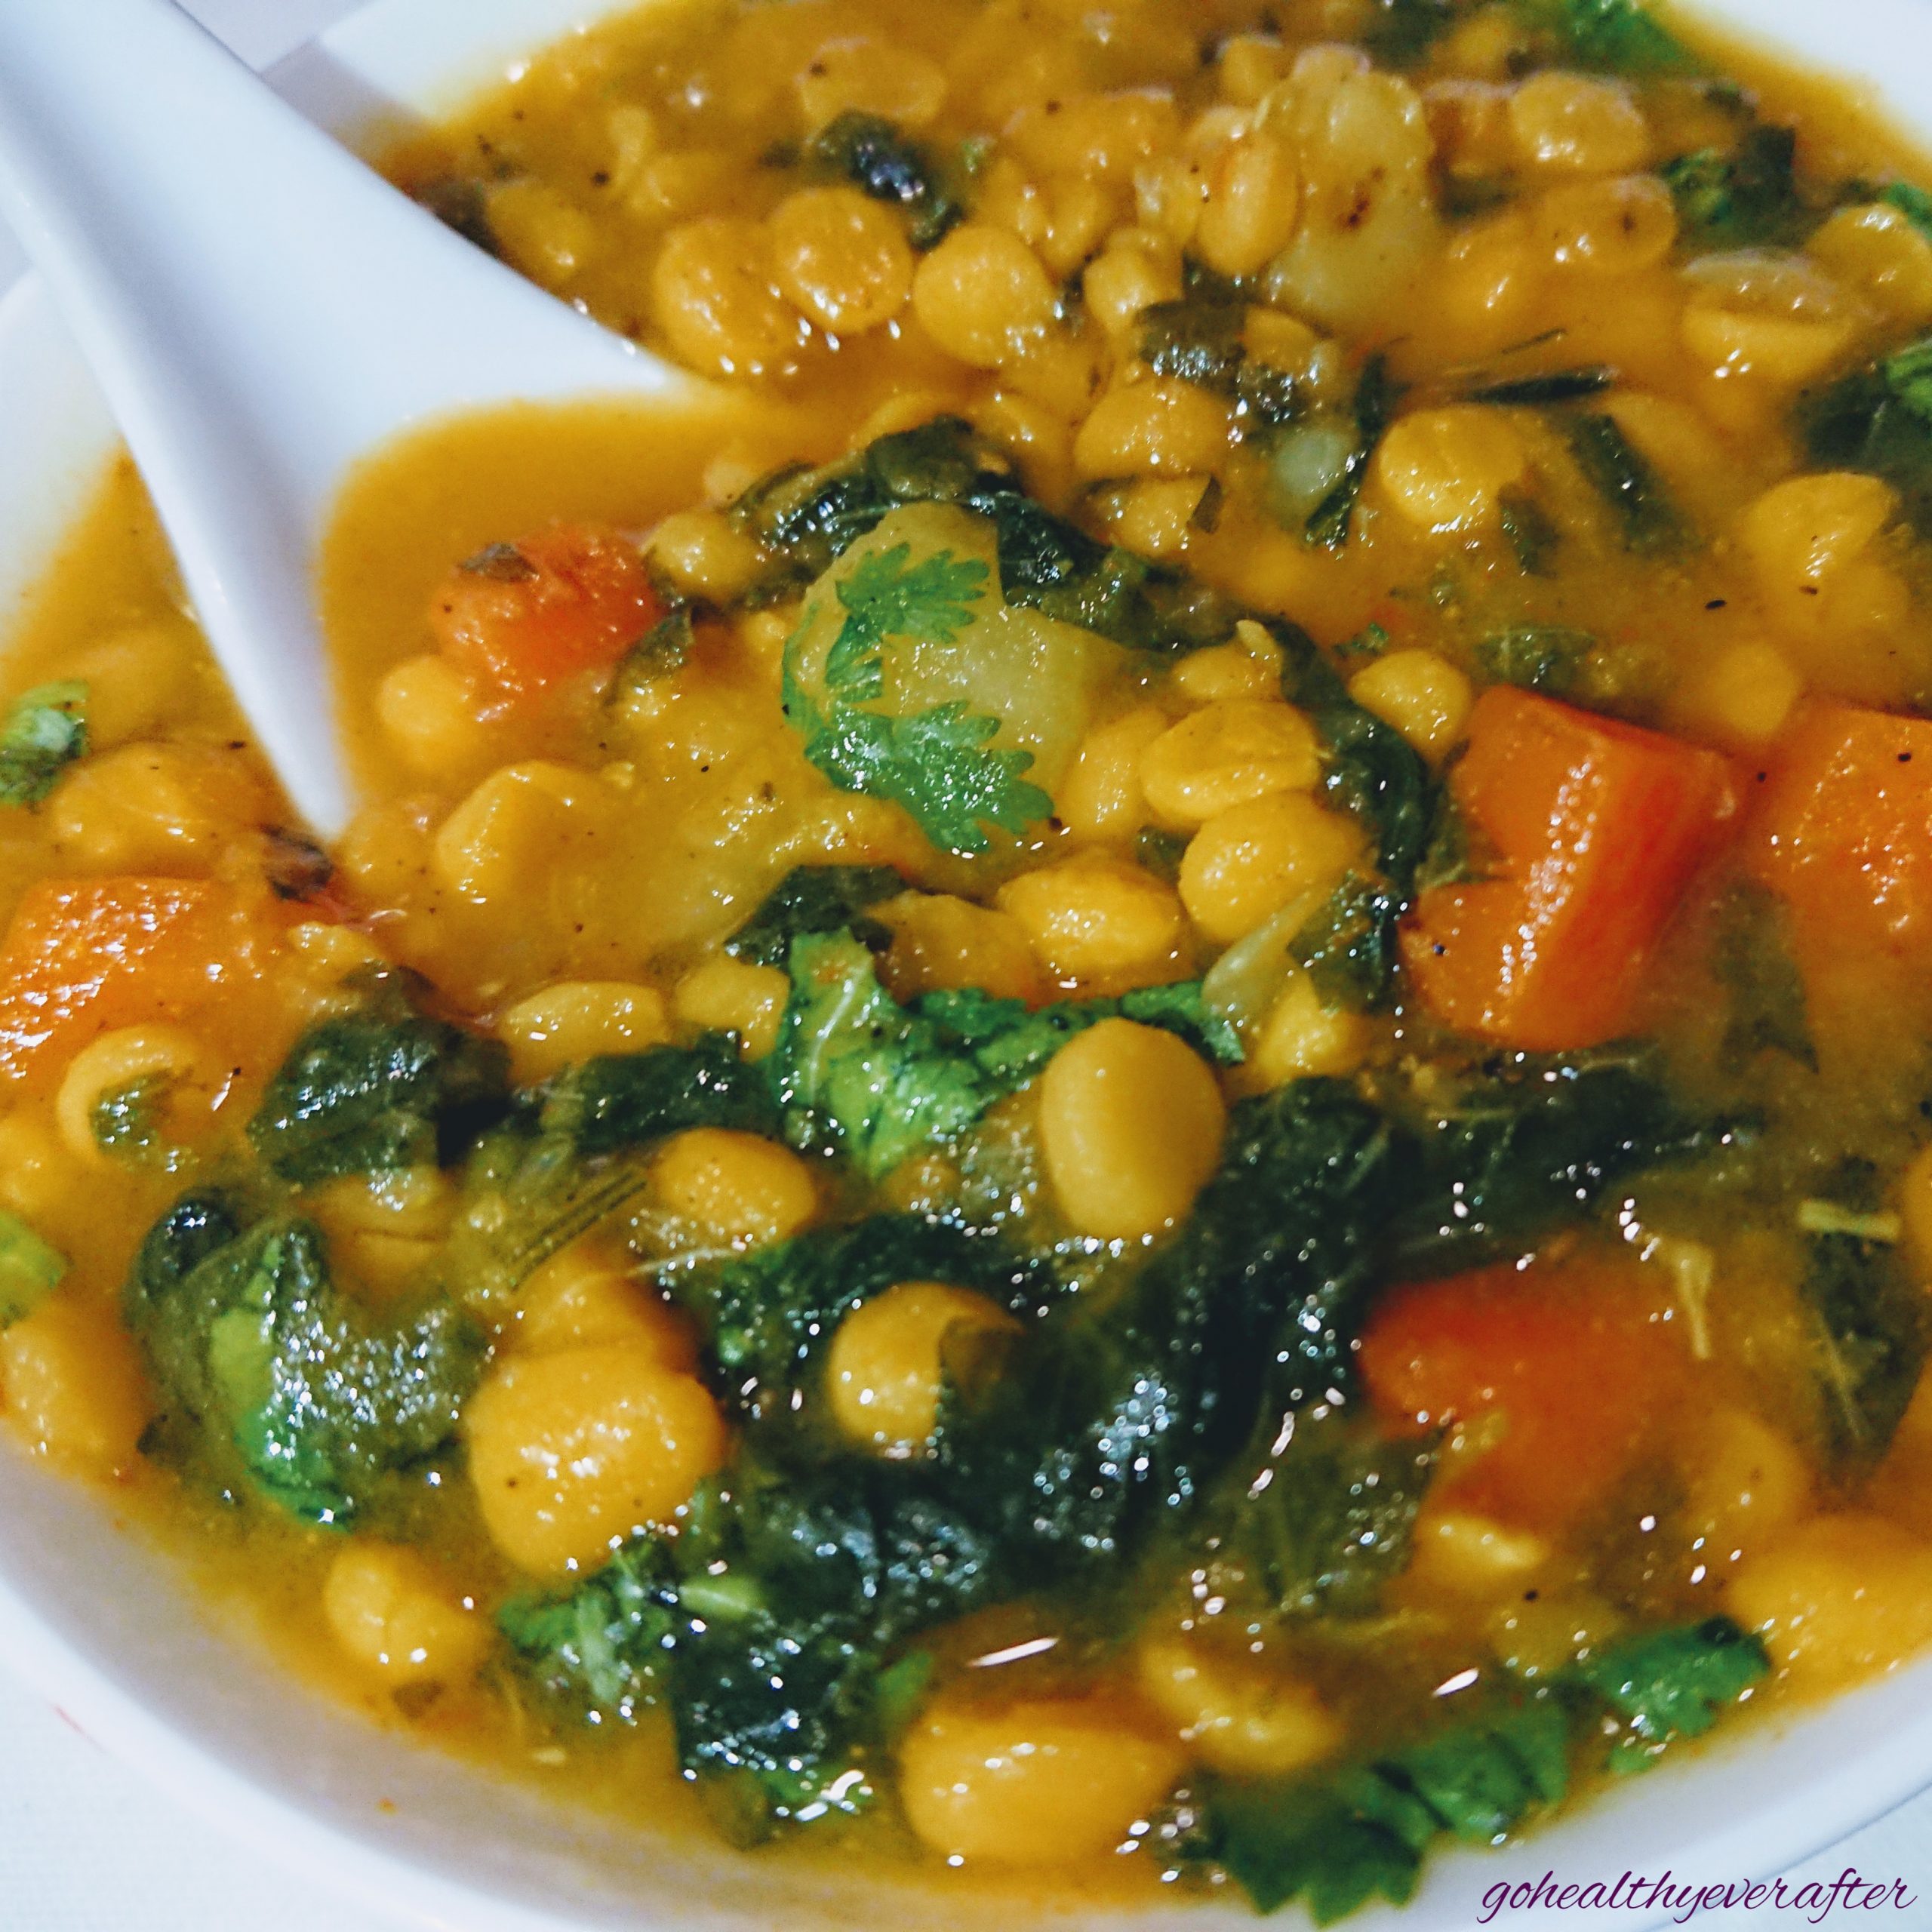 Best Recipe For Lentil Soup With Veggies